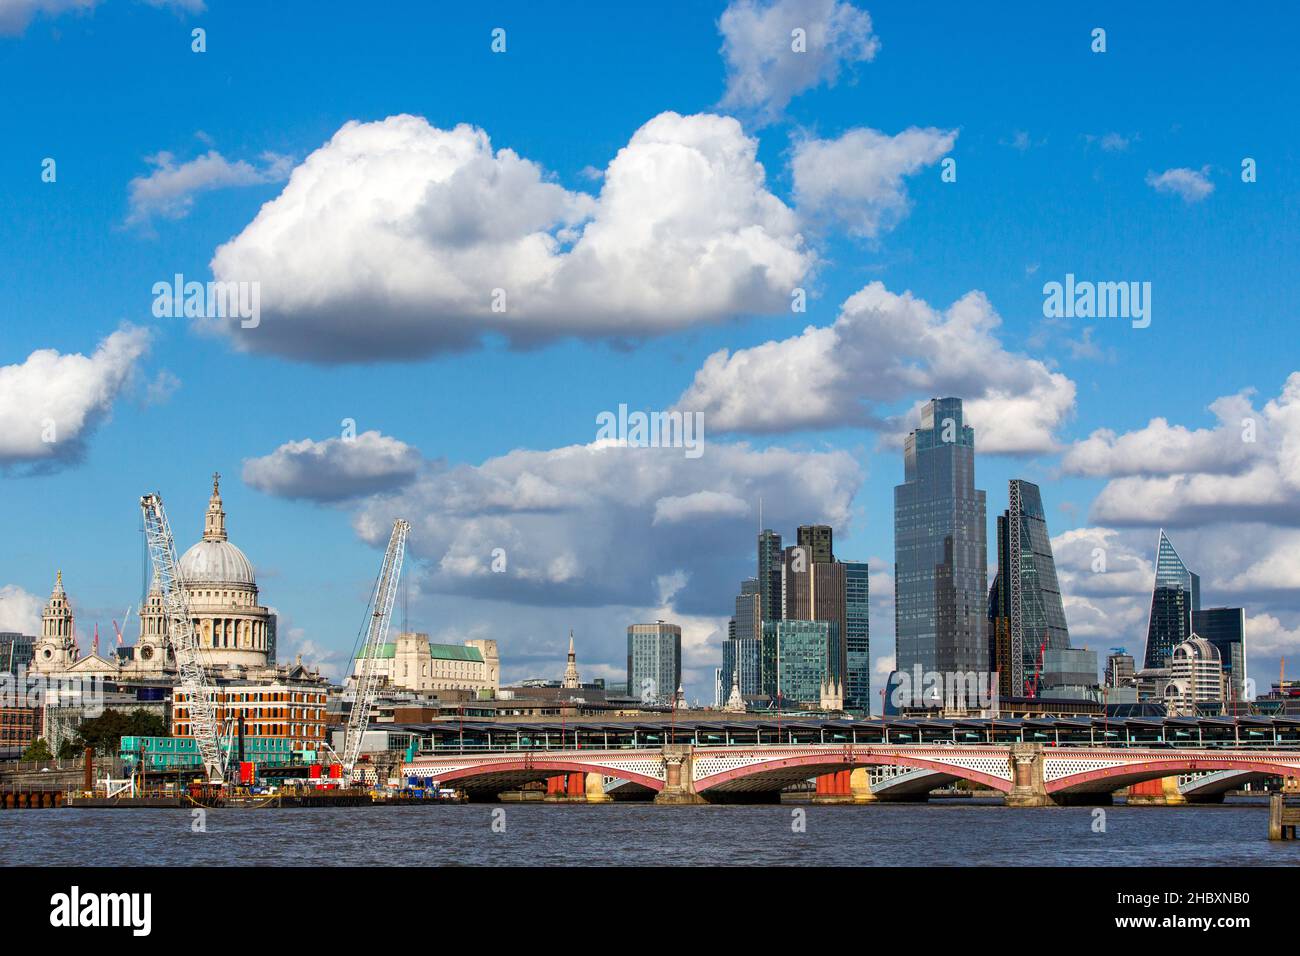 view from bridge of St. Pauls Cathedral and glass tower buildings in London with blue sky and big clouds and construction cranes Stock Photo